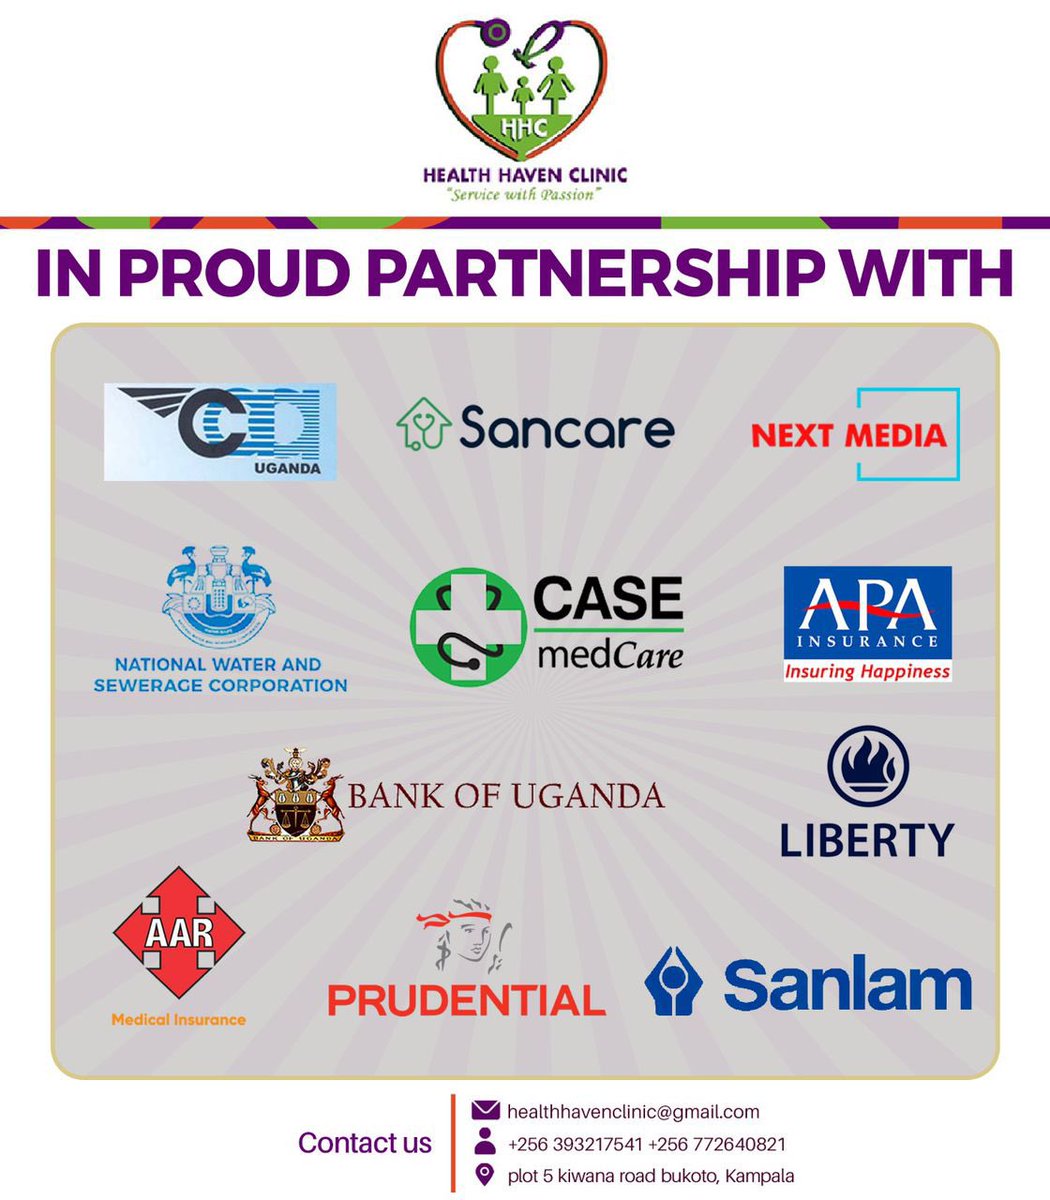 Health Haven Clinic partners with 10+ top medical insurance companies to bring you unparalleled healthcare services. Your well-being is our priority! #HealthHavenClinicUg